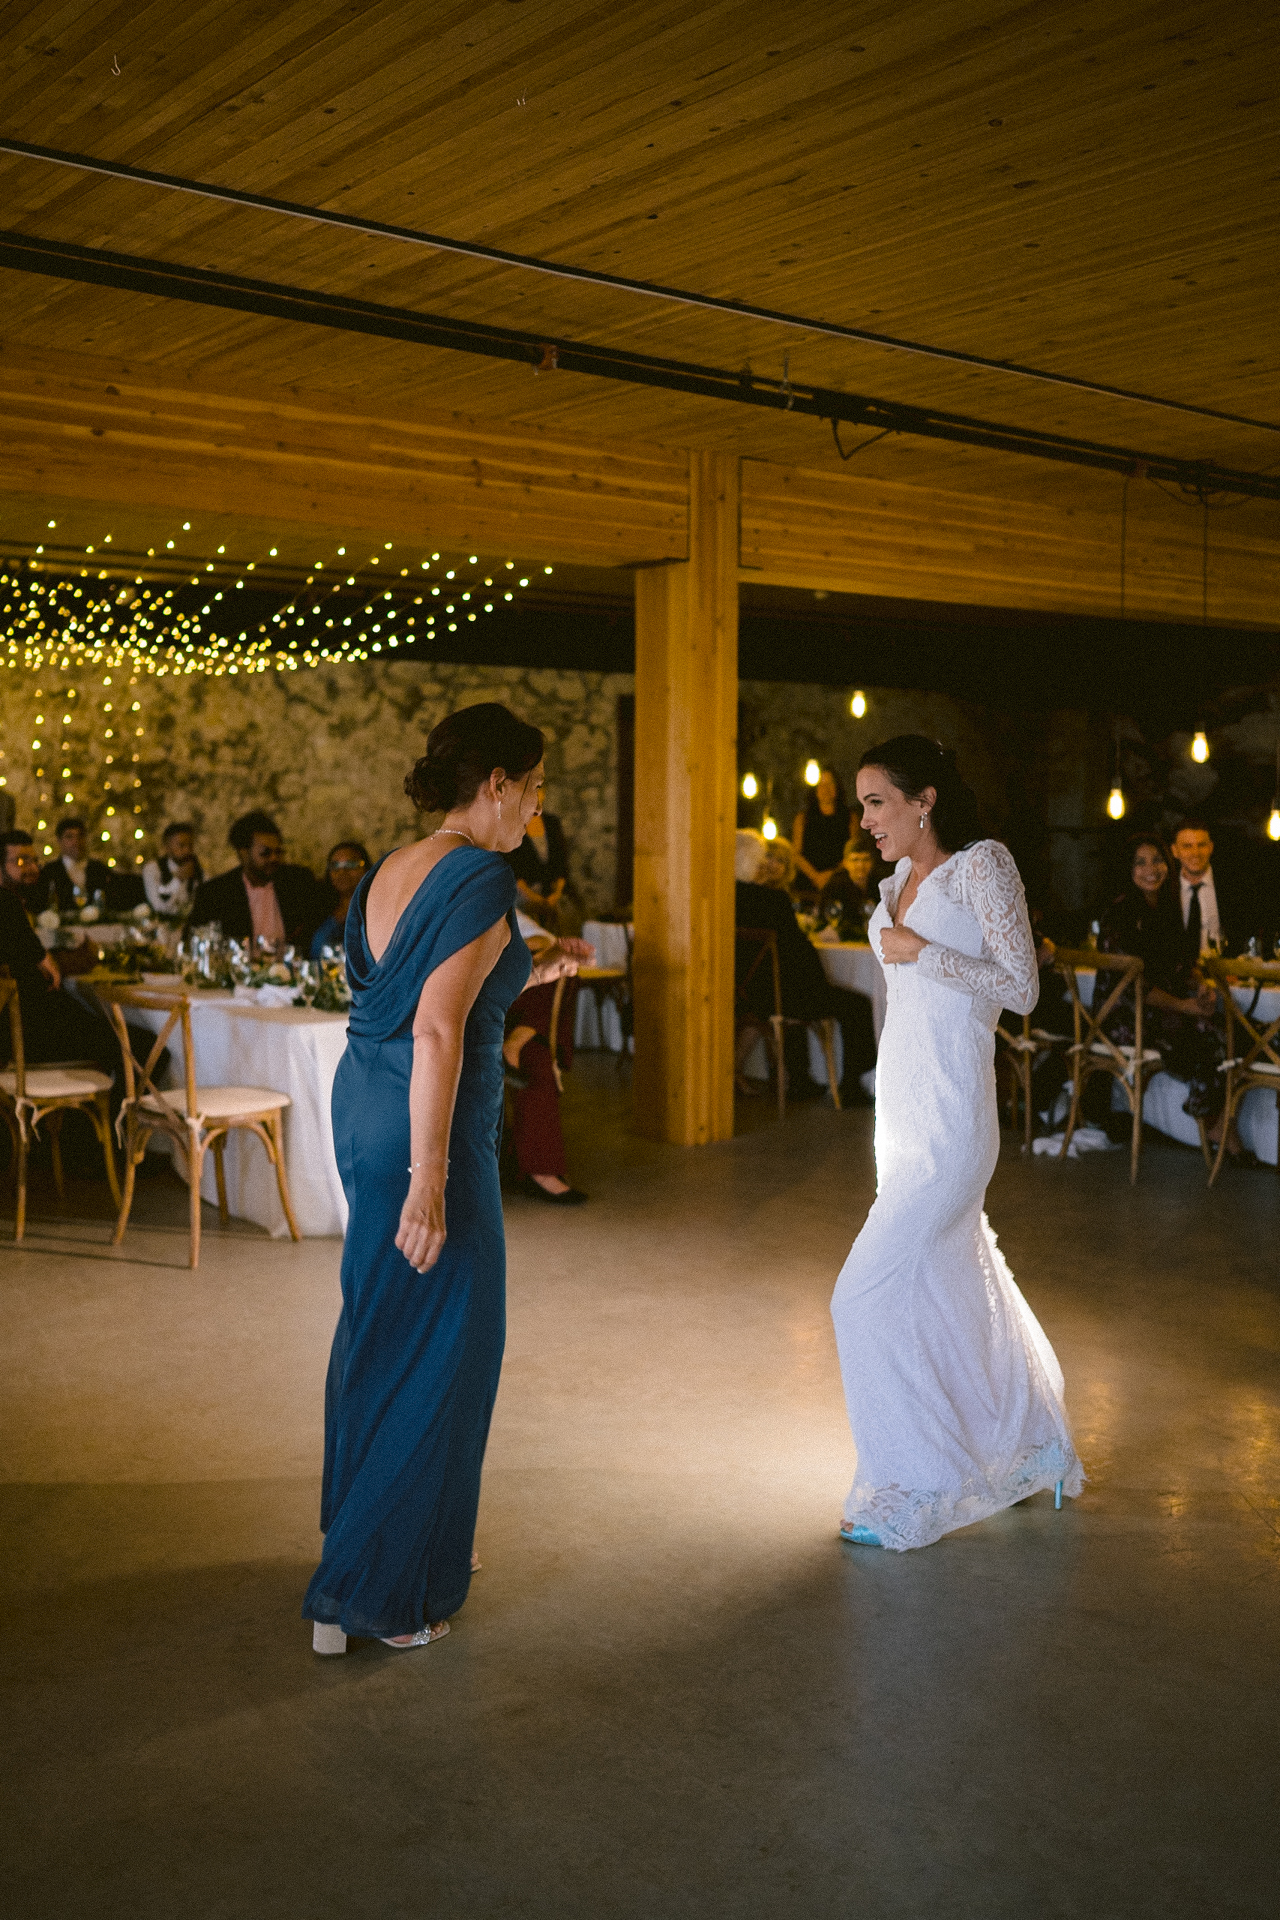 Bride and her mother perform a dance in front of their guests and Toronto wedding photographer.